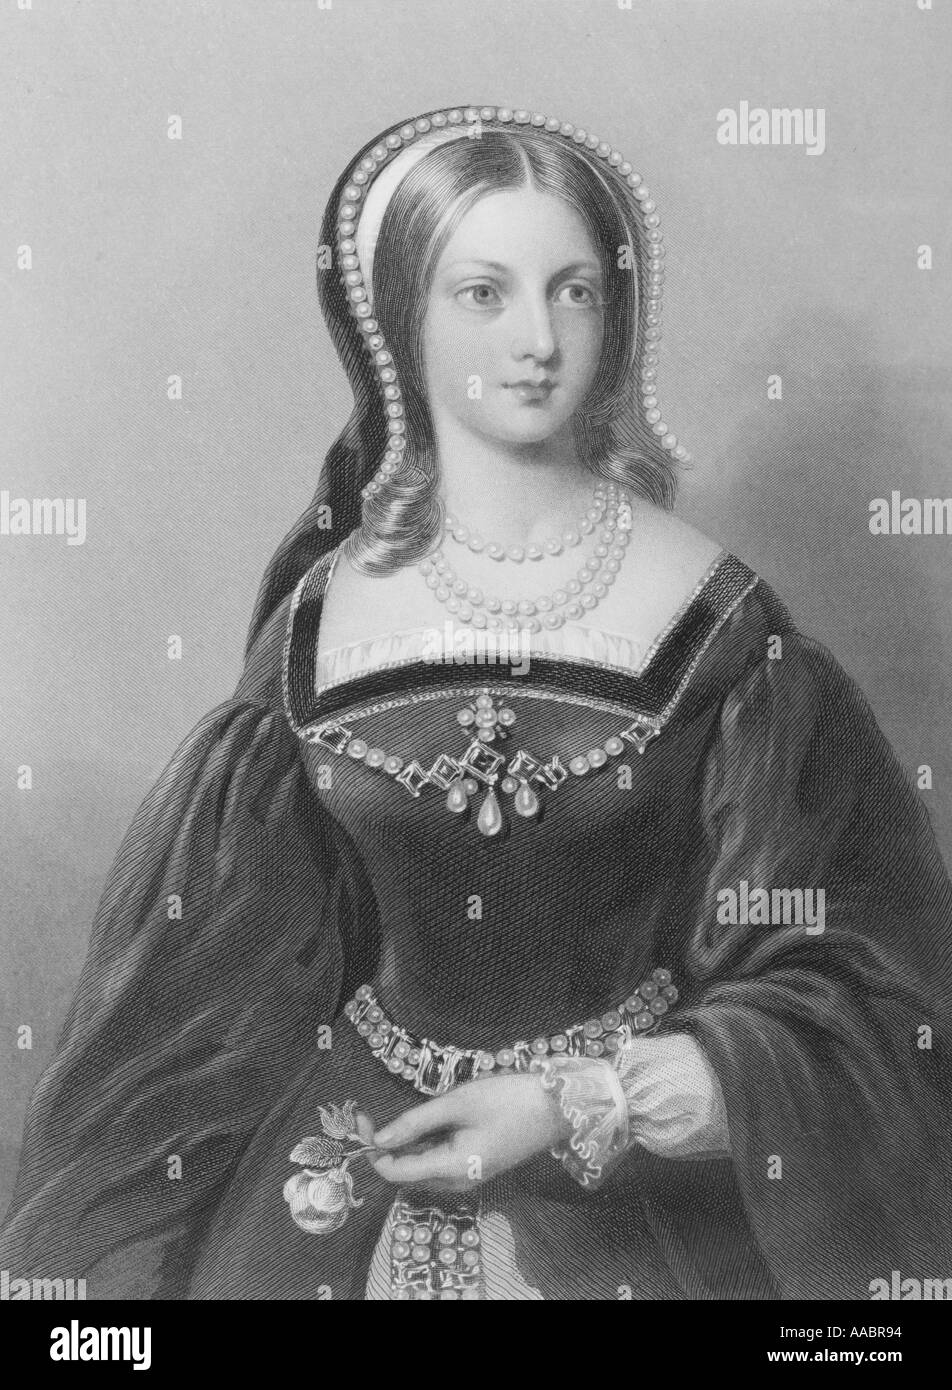 Lady Jane Grey, aka Lady Jane Dudley, 1537 - 1554. Titular Queen of England for nine days in 1553. Stock Photo